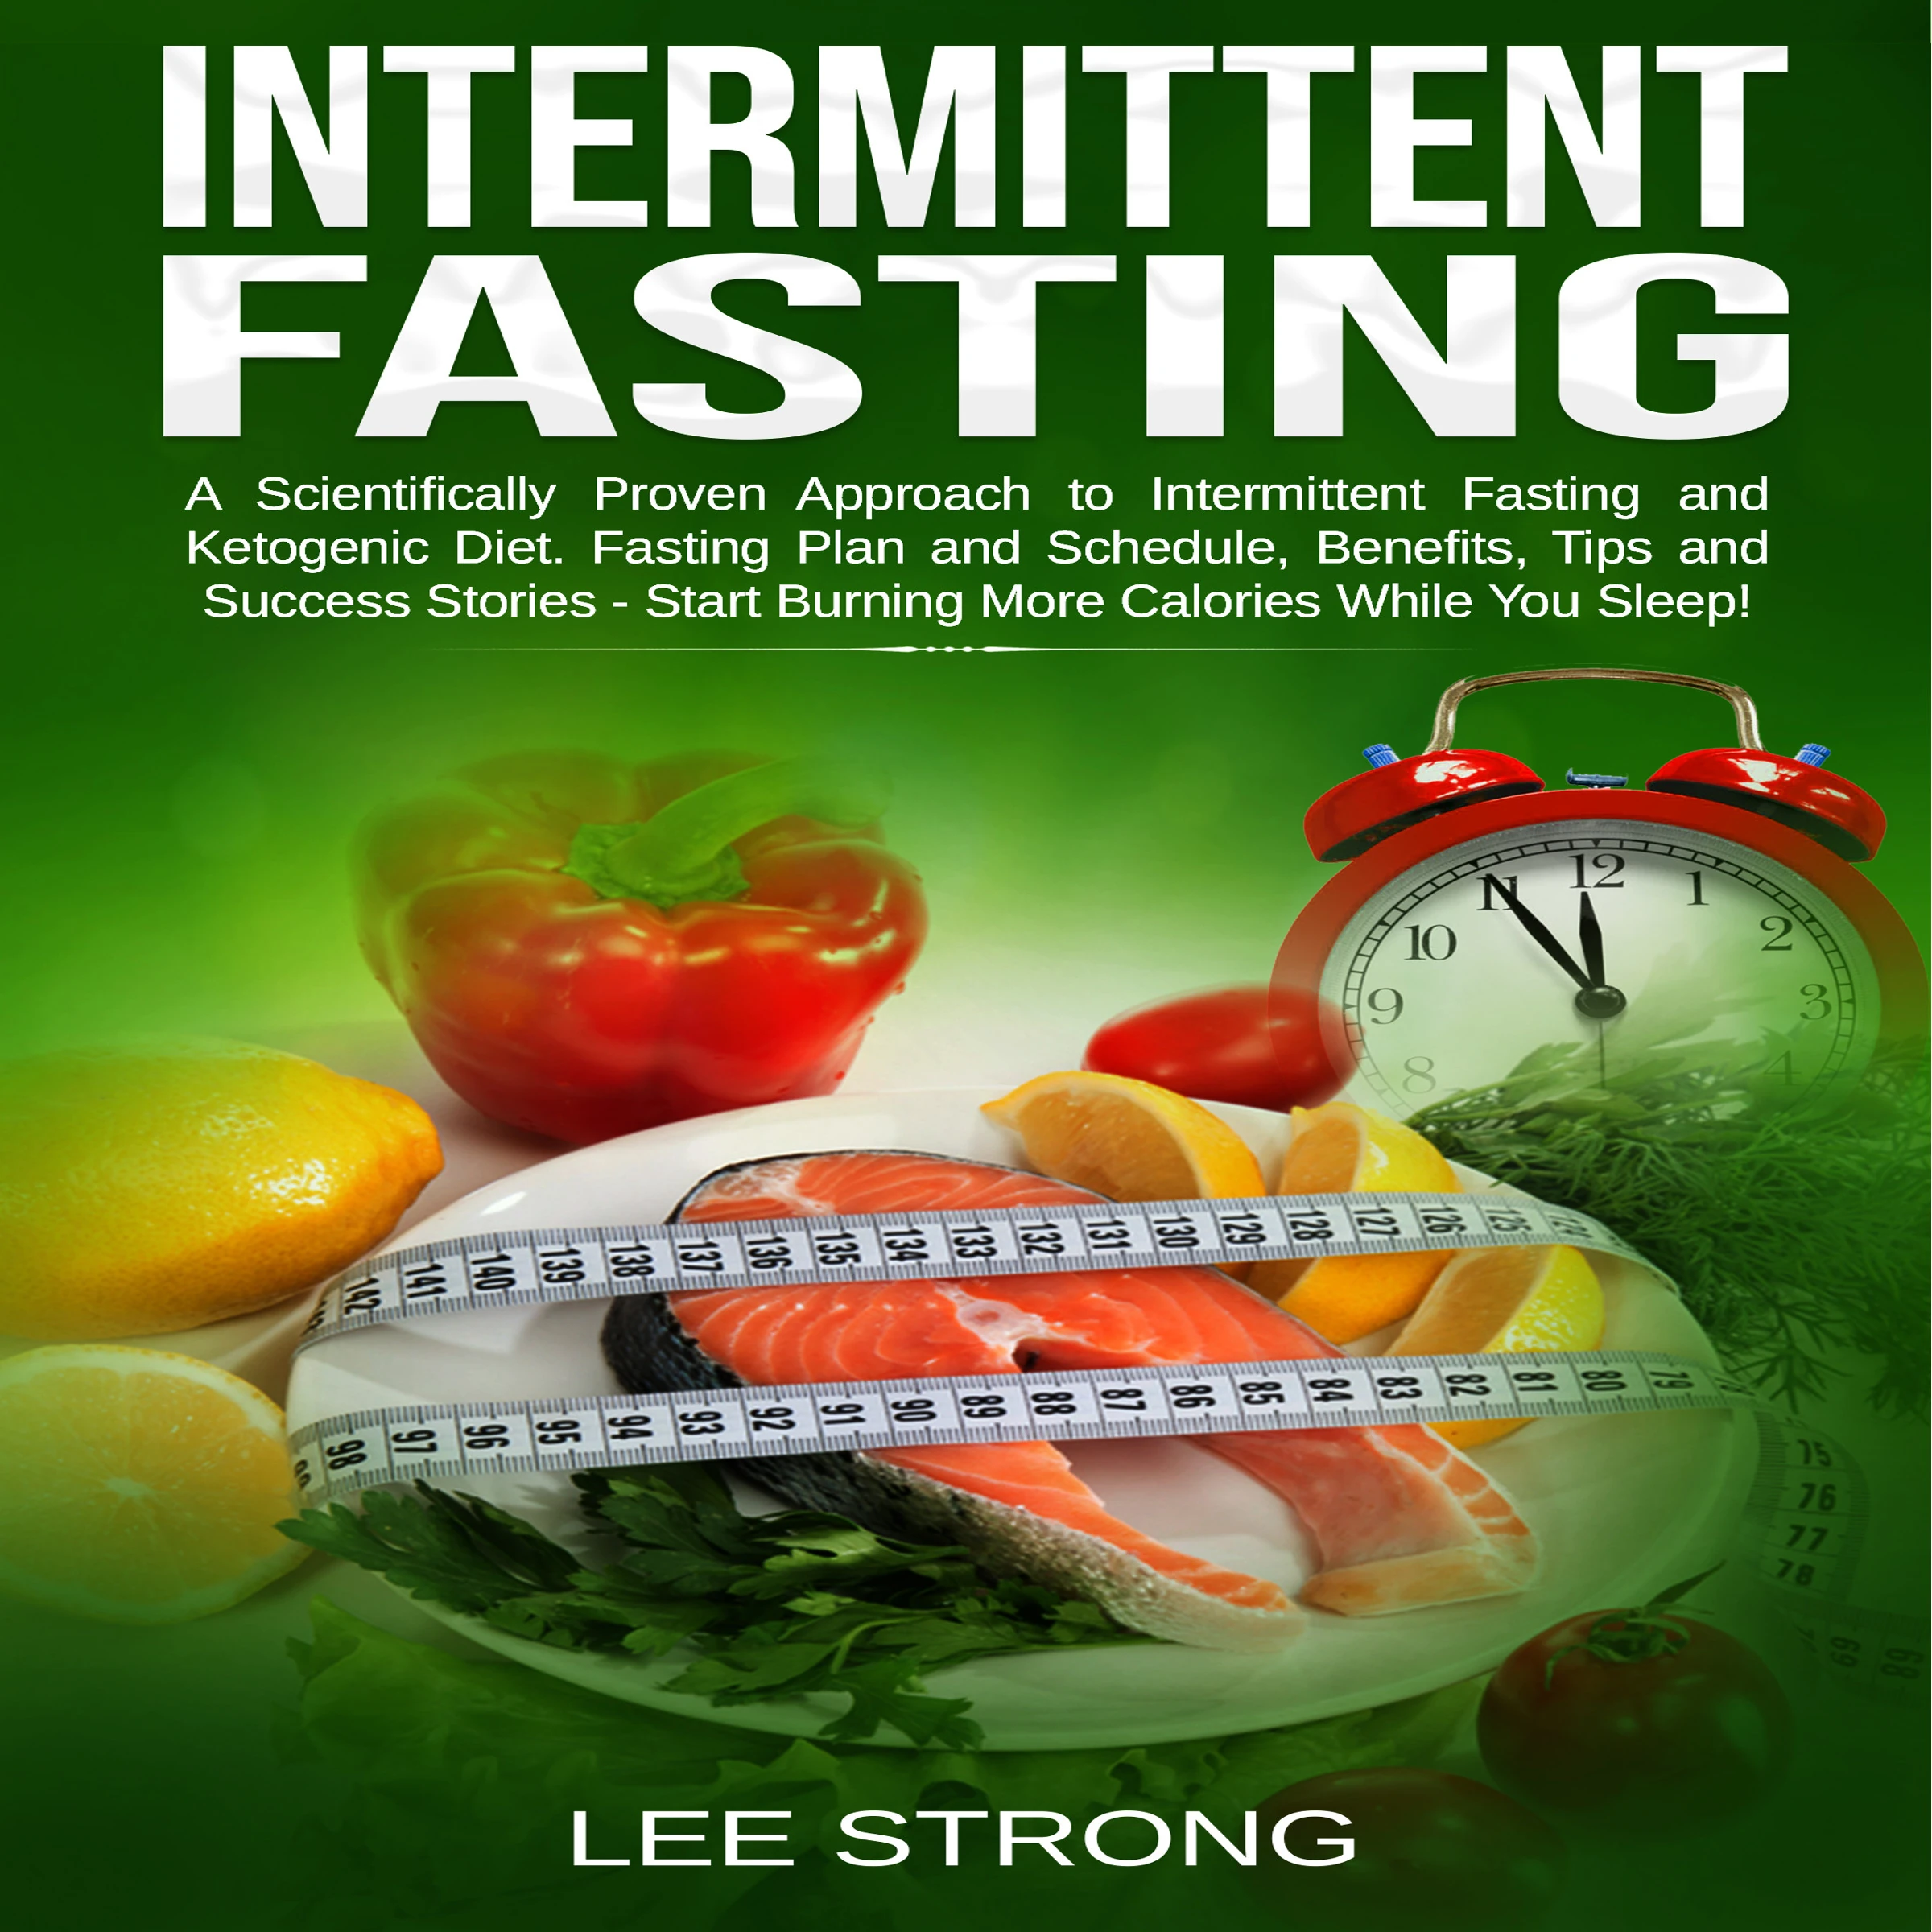 Intermittent Fasting  A Scientifically Proven Approach to Intermittent Fasting and Ketogenic Diet. Fasting Plan and Schedule, Benefits, Tips and Success Stories - Start Burning More Calories While You Sleep! Audiobook by Lee Strong